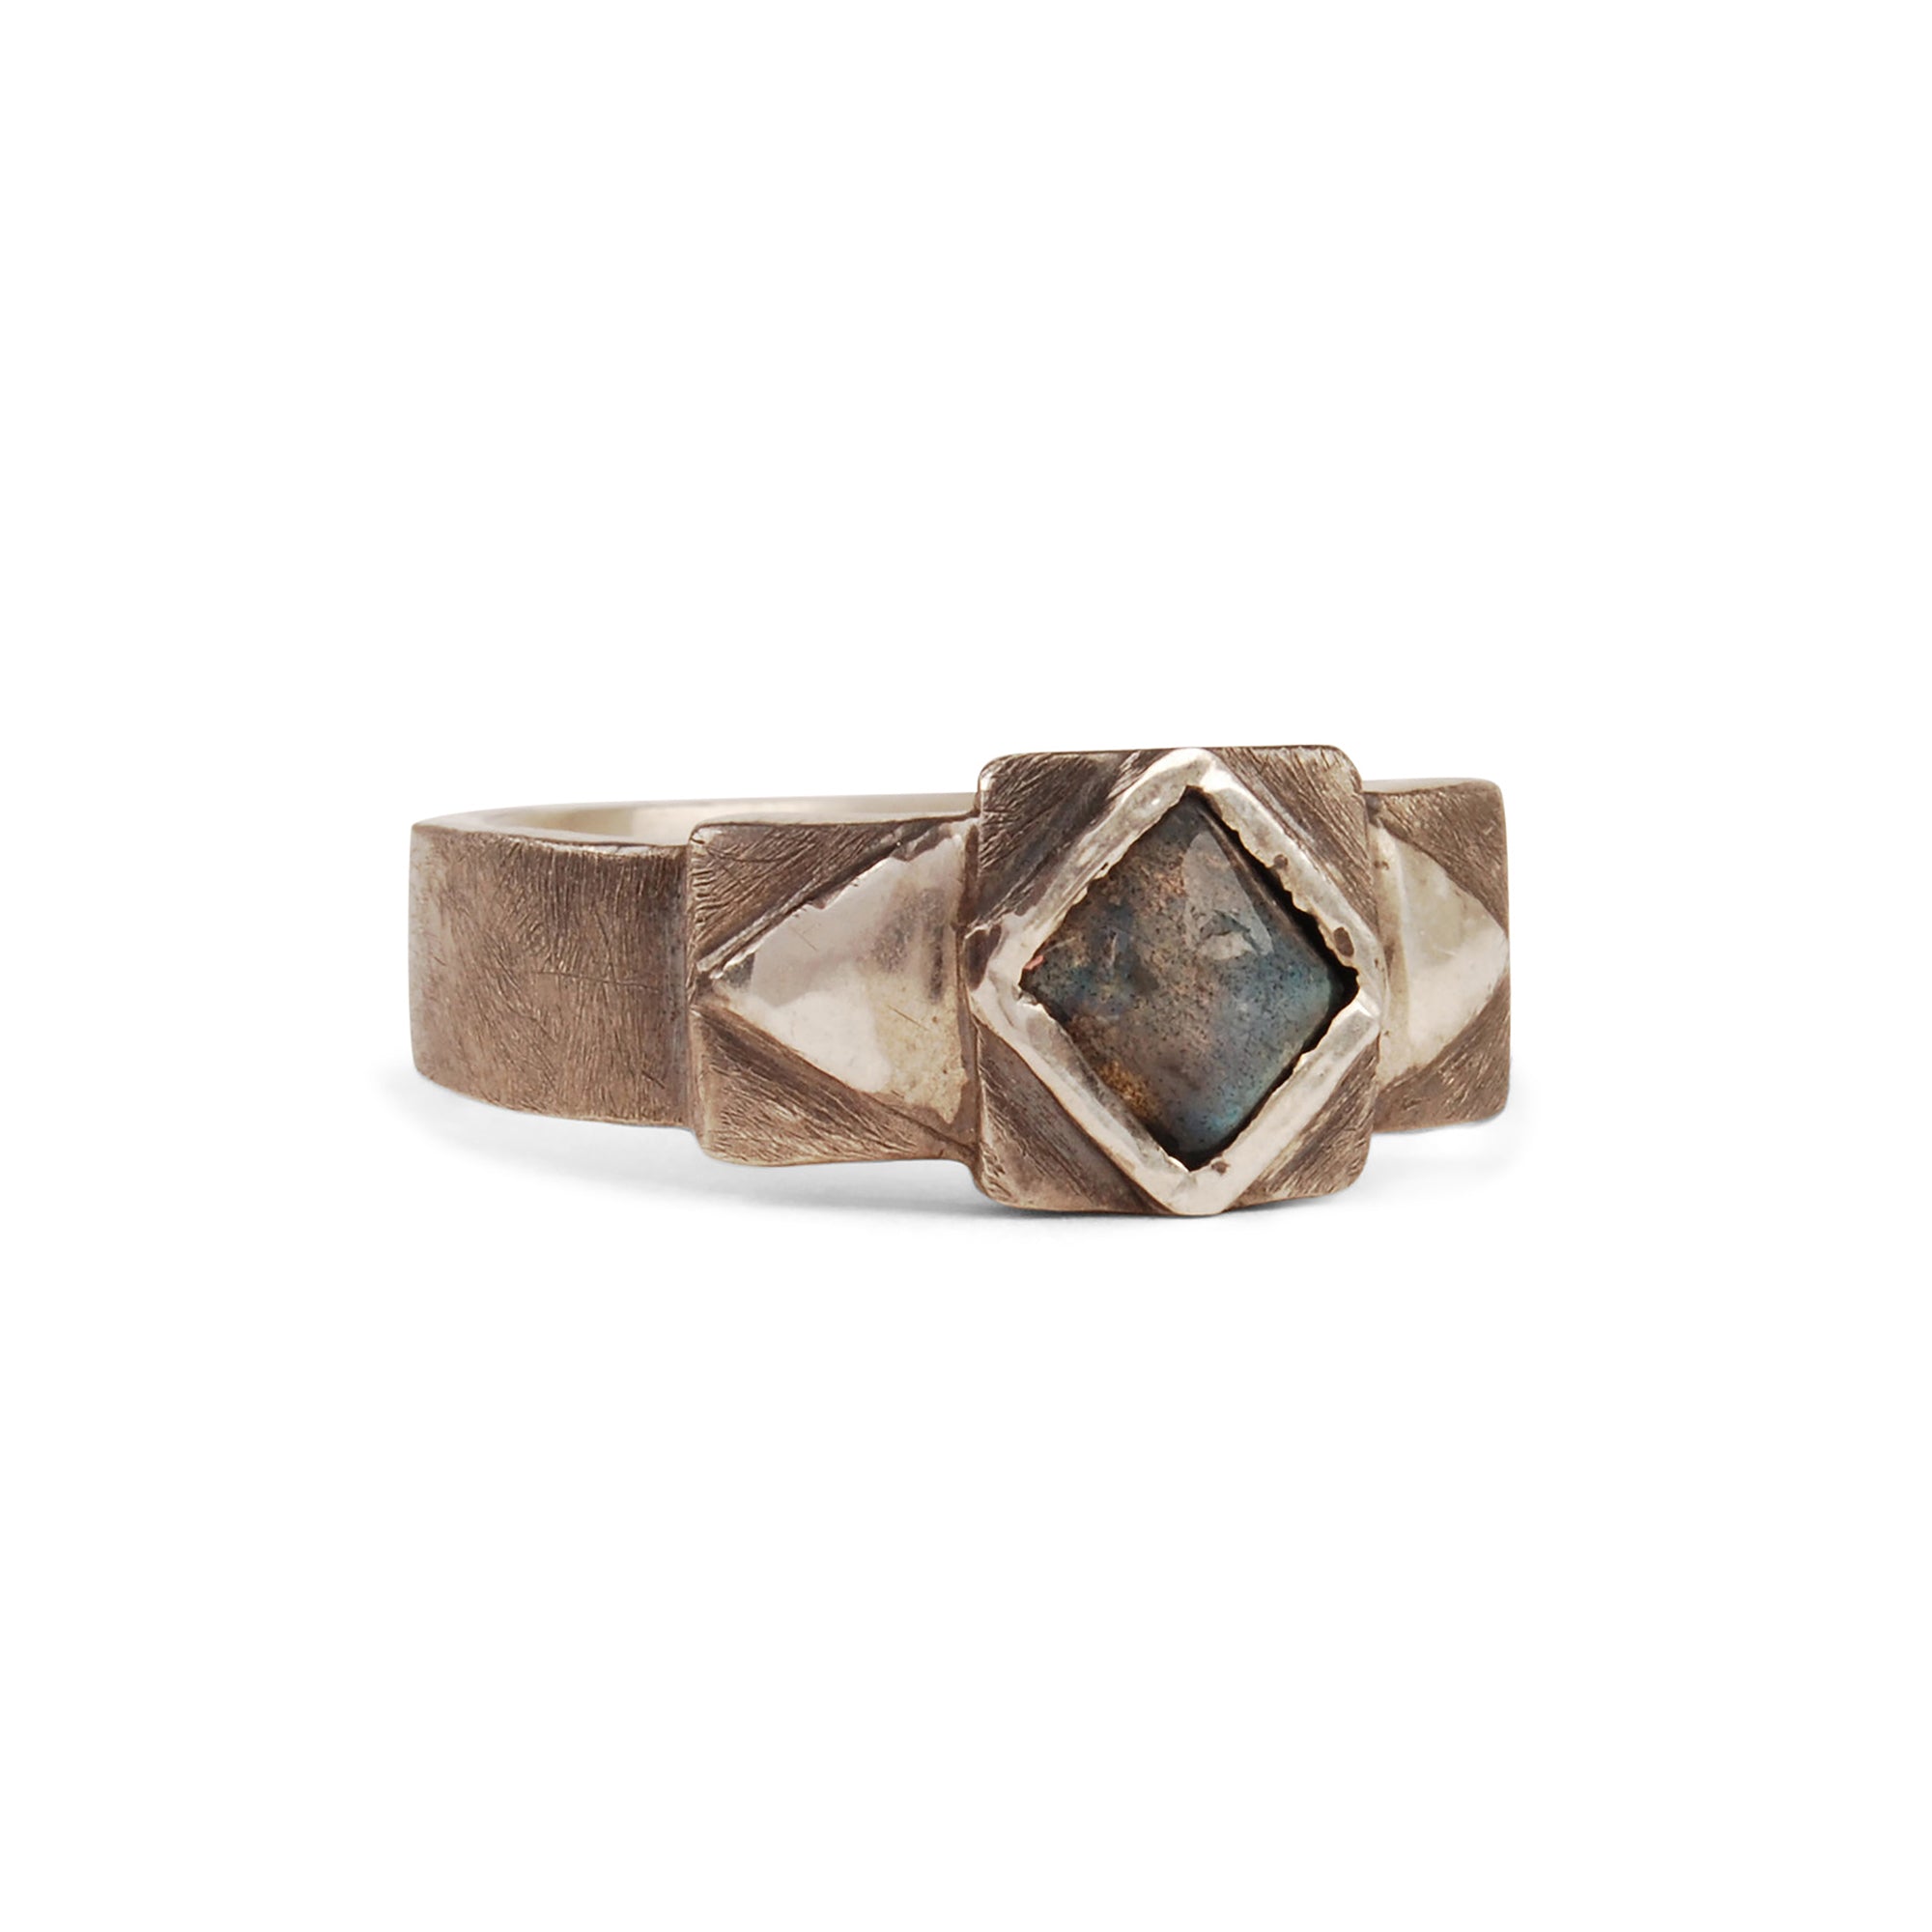 The Grit Stepped Band is crafted in sterling silver, featuring a rustic texture and oxidation and either lapis or labradorite